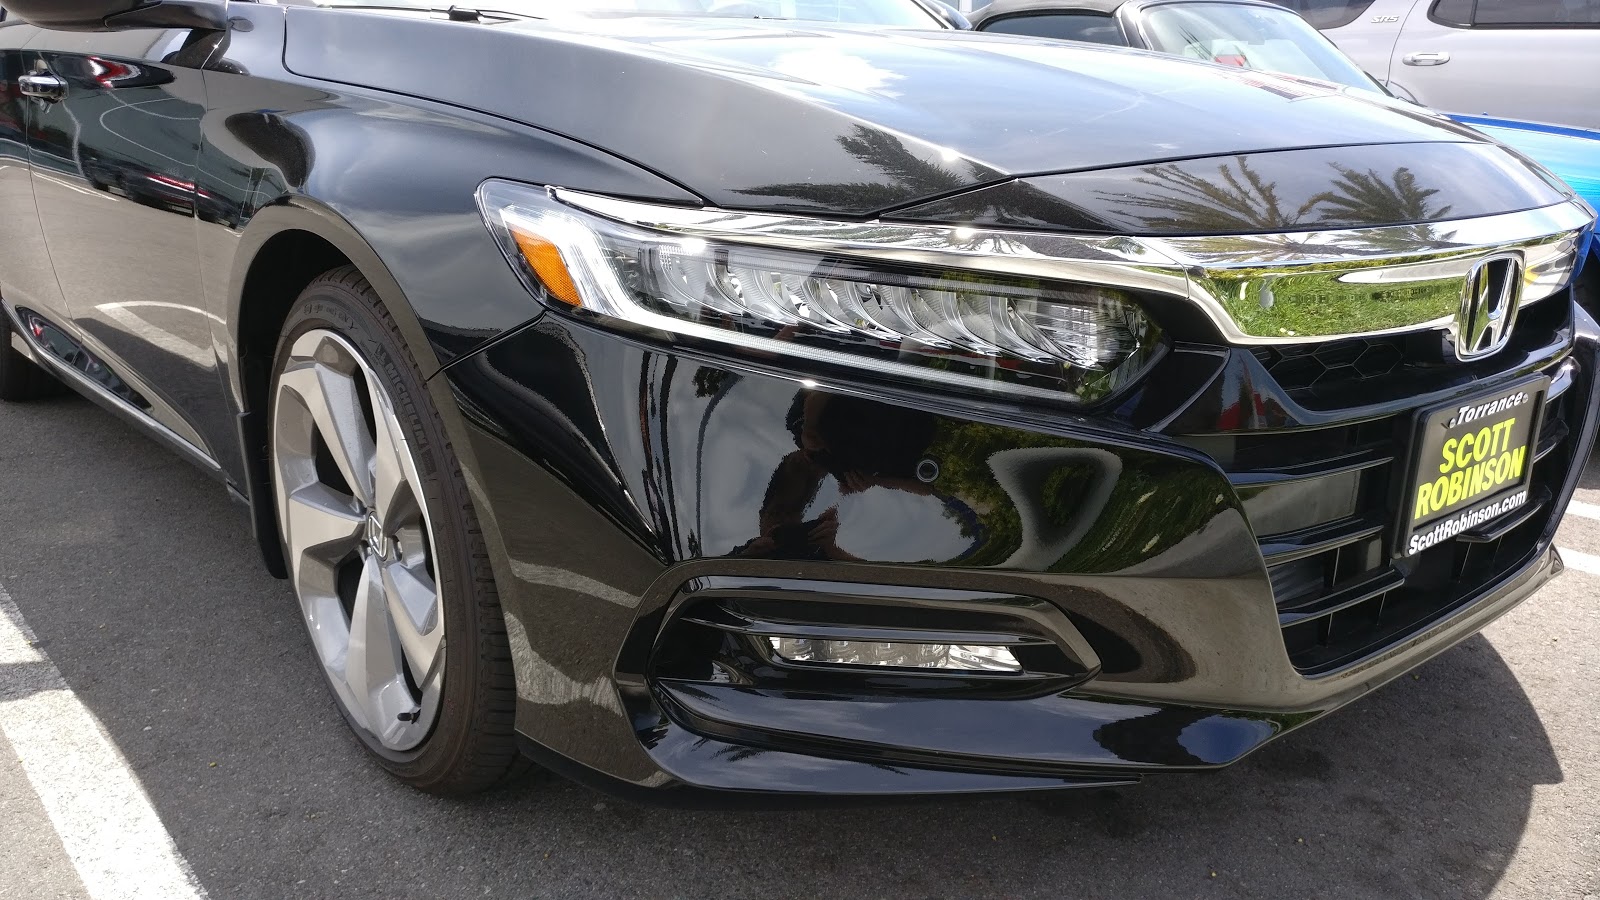 East-West Brothers Garage: Test Drive: 2018 Honda Accord Touring 2.0T